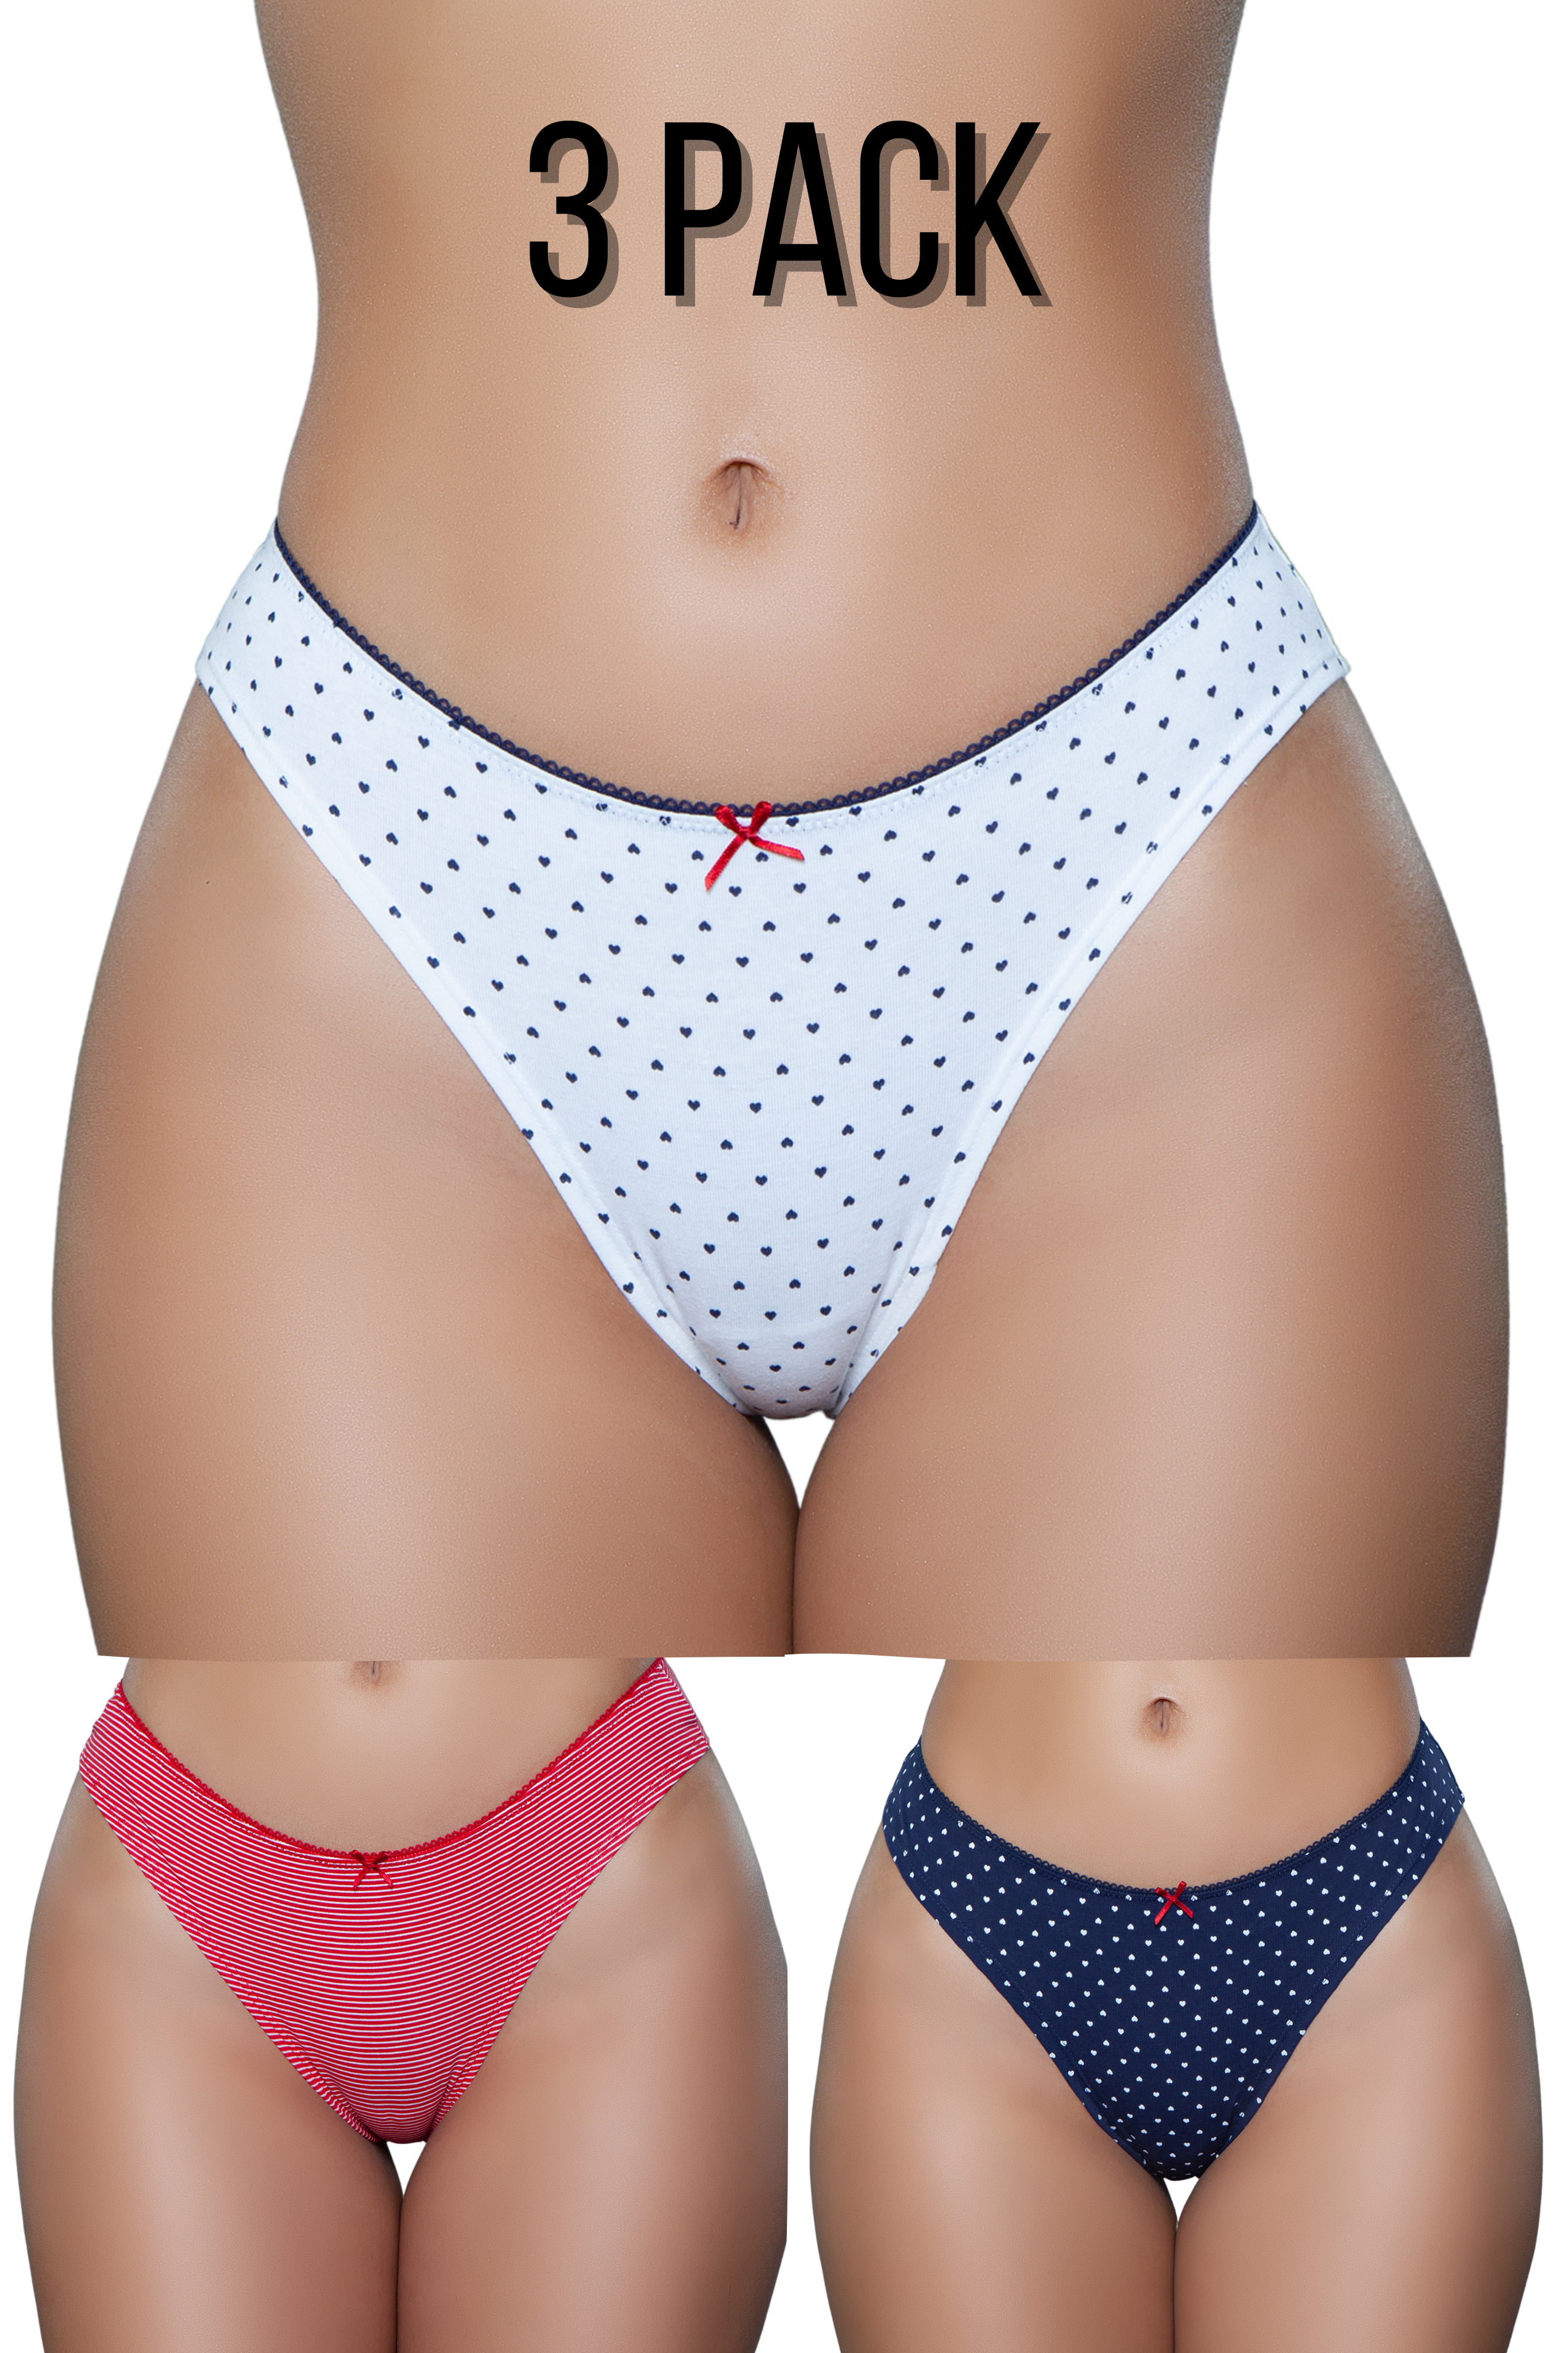 3pc. Low-Rise Jersey Knit Brief Panties